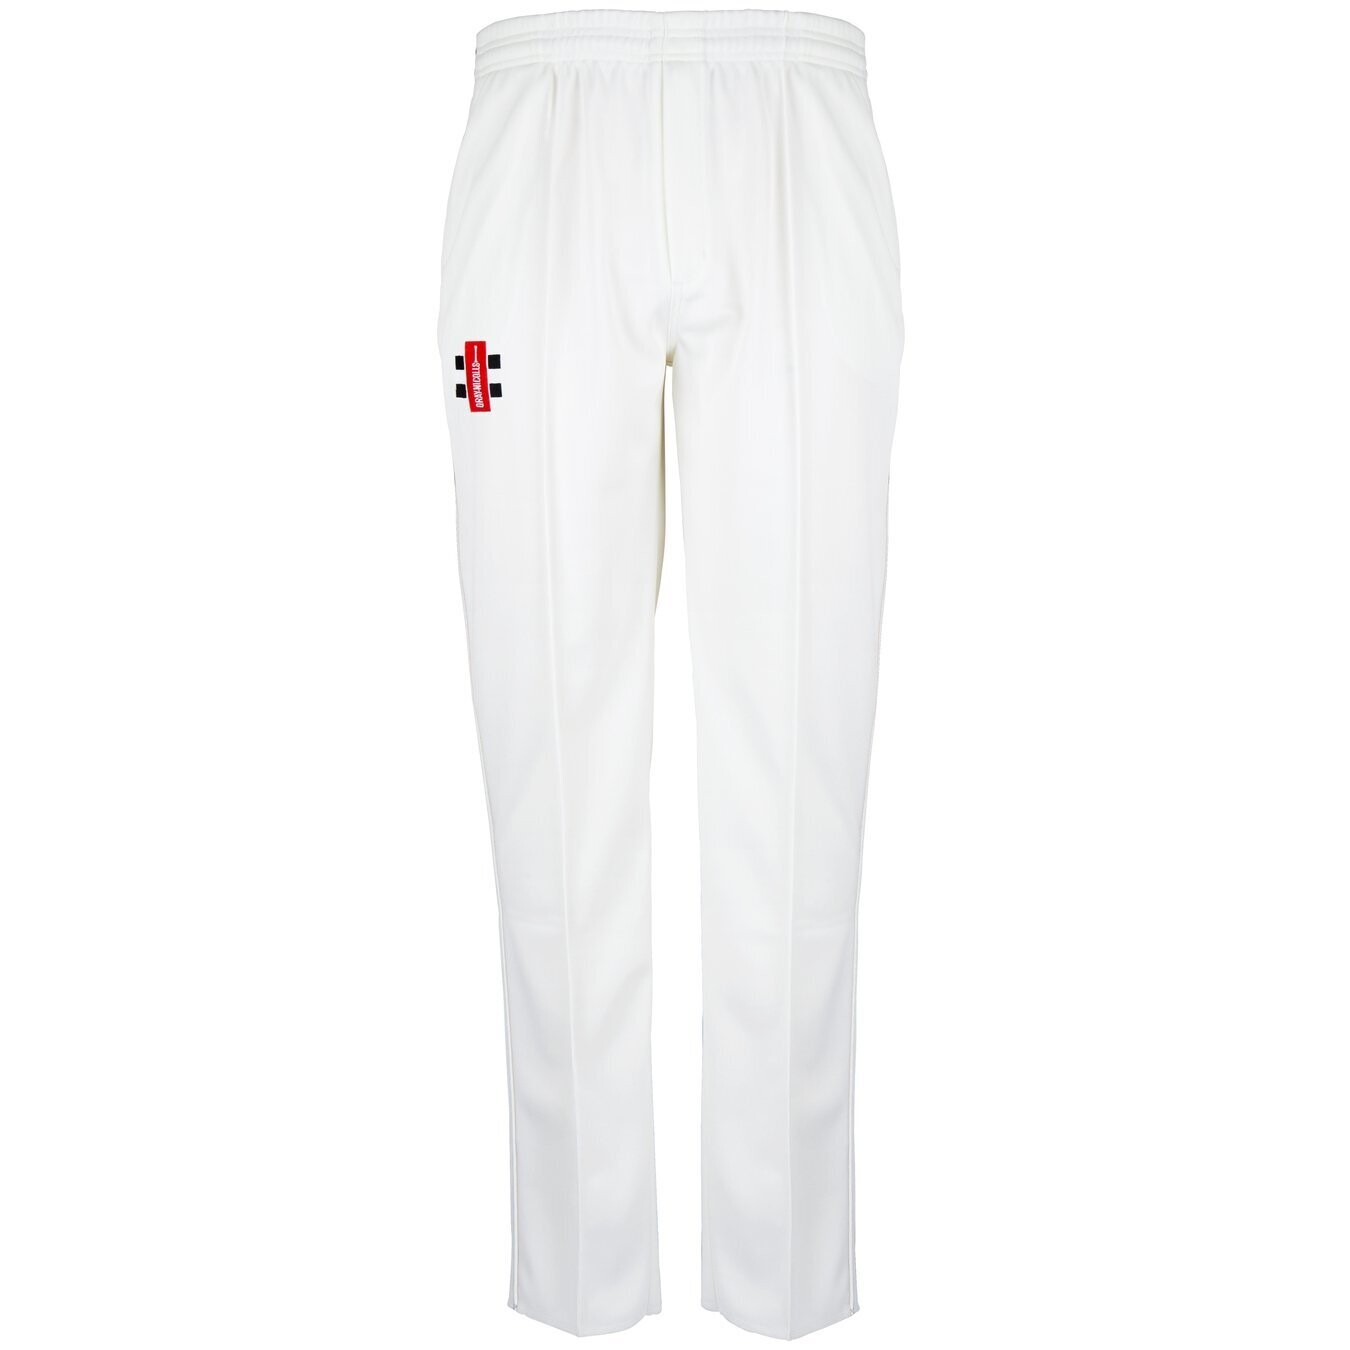 Thornaby Matrix V2 Cricket Trousers